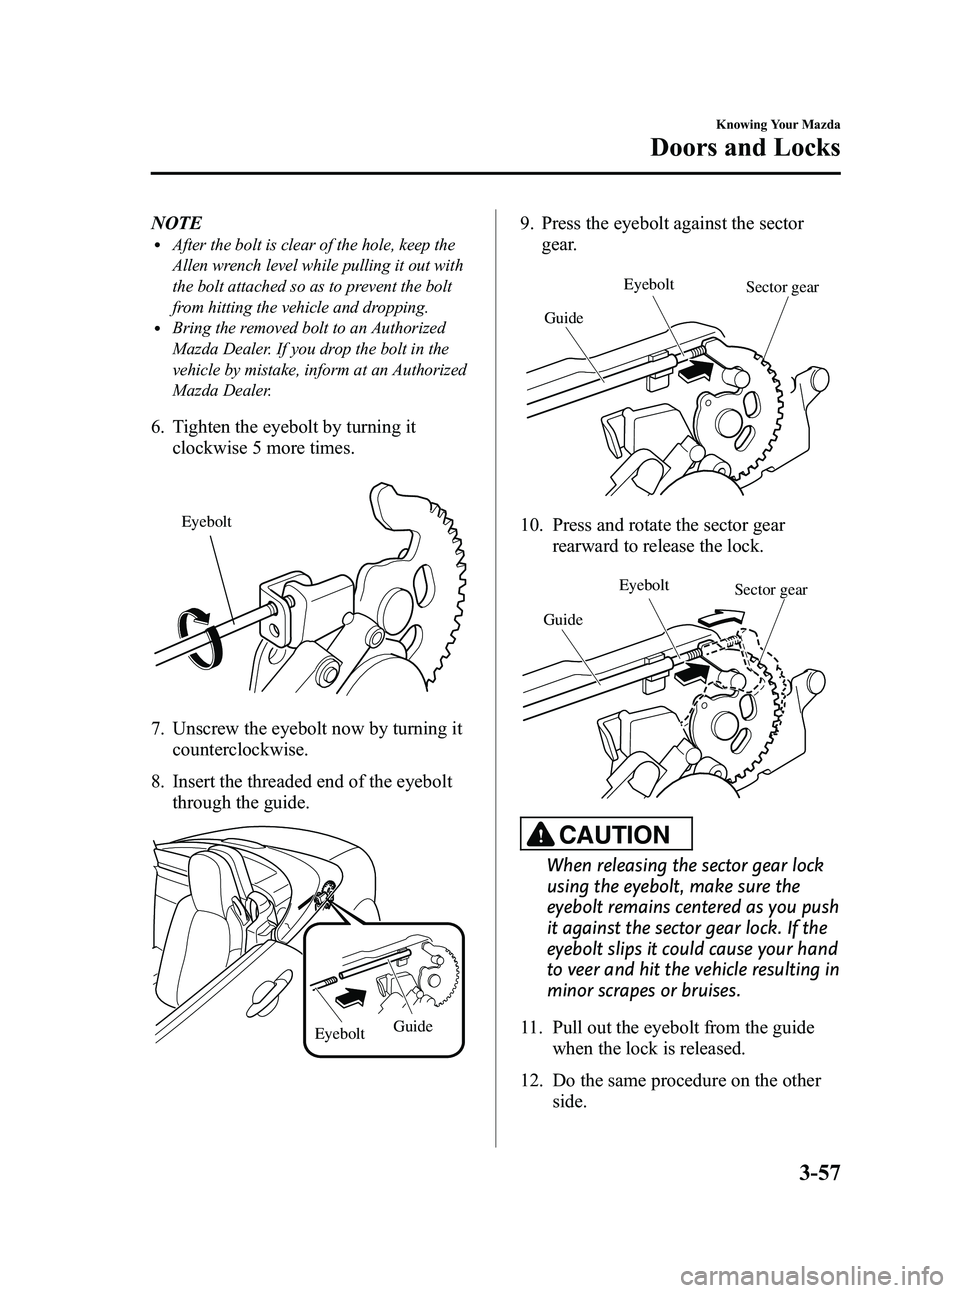 MAZDA MODEL MX-5 MIATA 2009  Owners Manual Black plate (119,1)
NOTElAfter the bolt is clear of the hole, keep the
Allen wrench level while pulling it out with
the bolt attached so as to prevent the bolt
from hitting the vehicle and dropping.
l